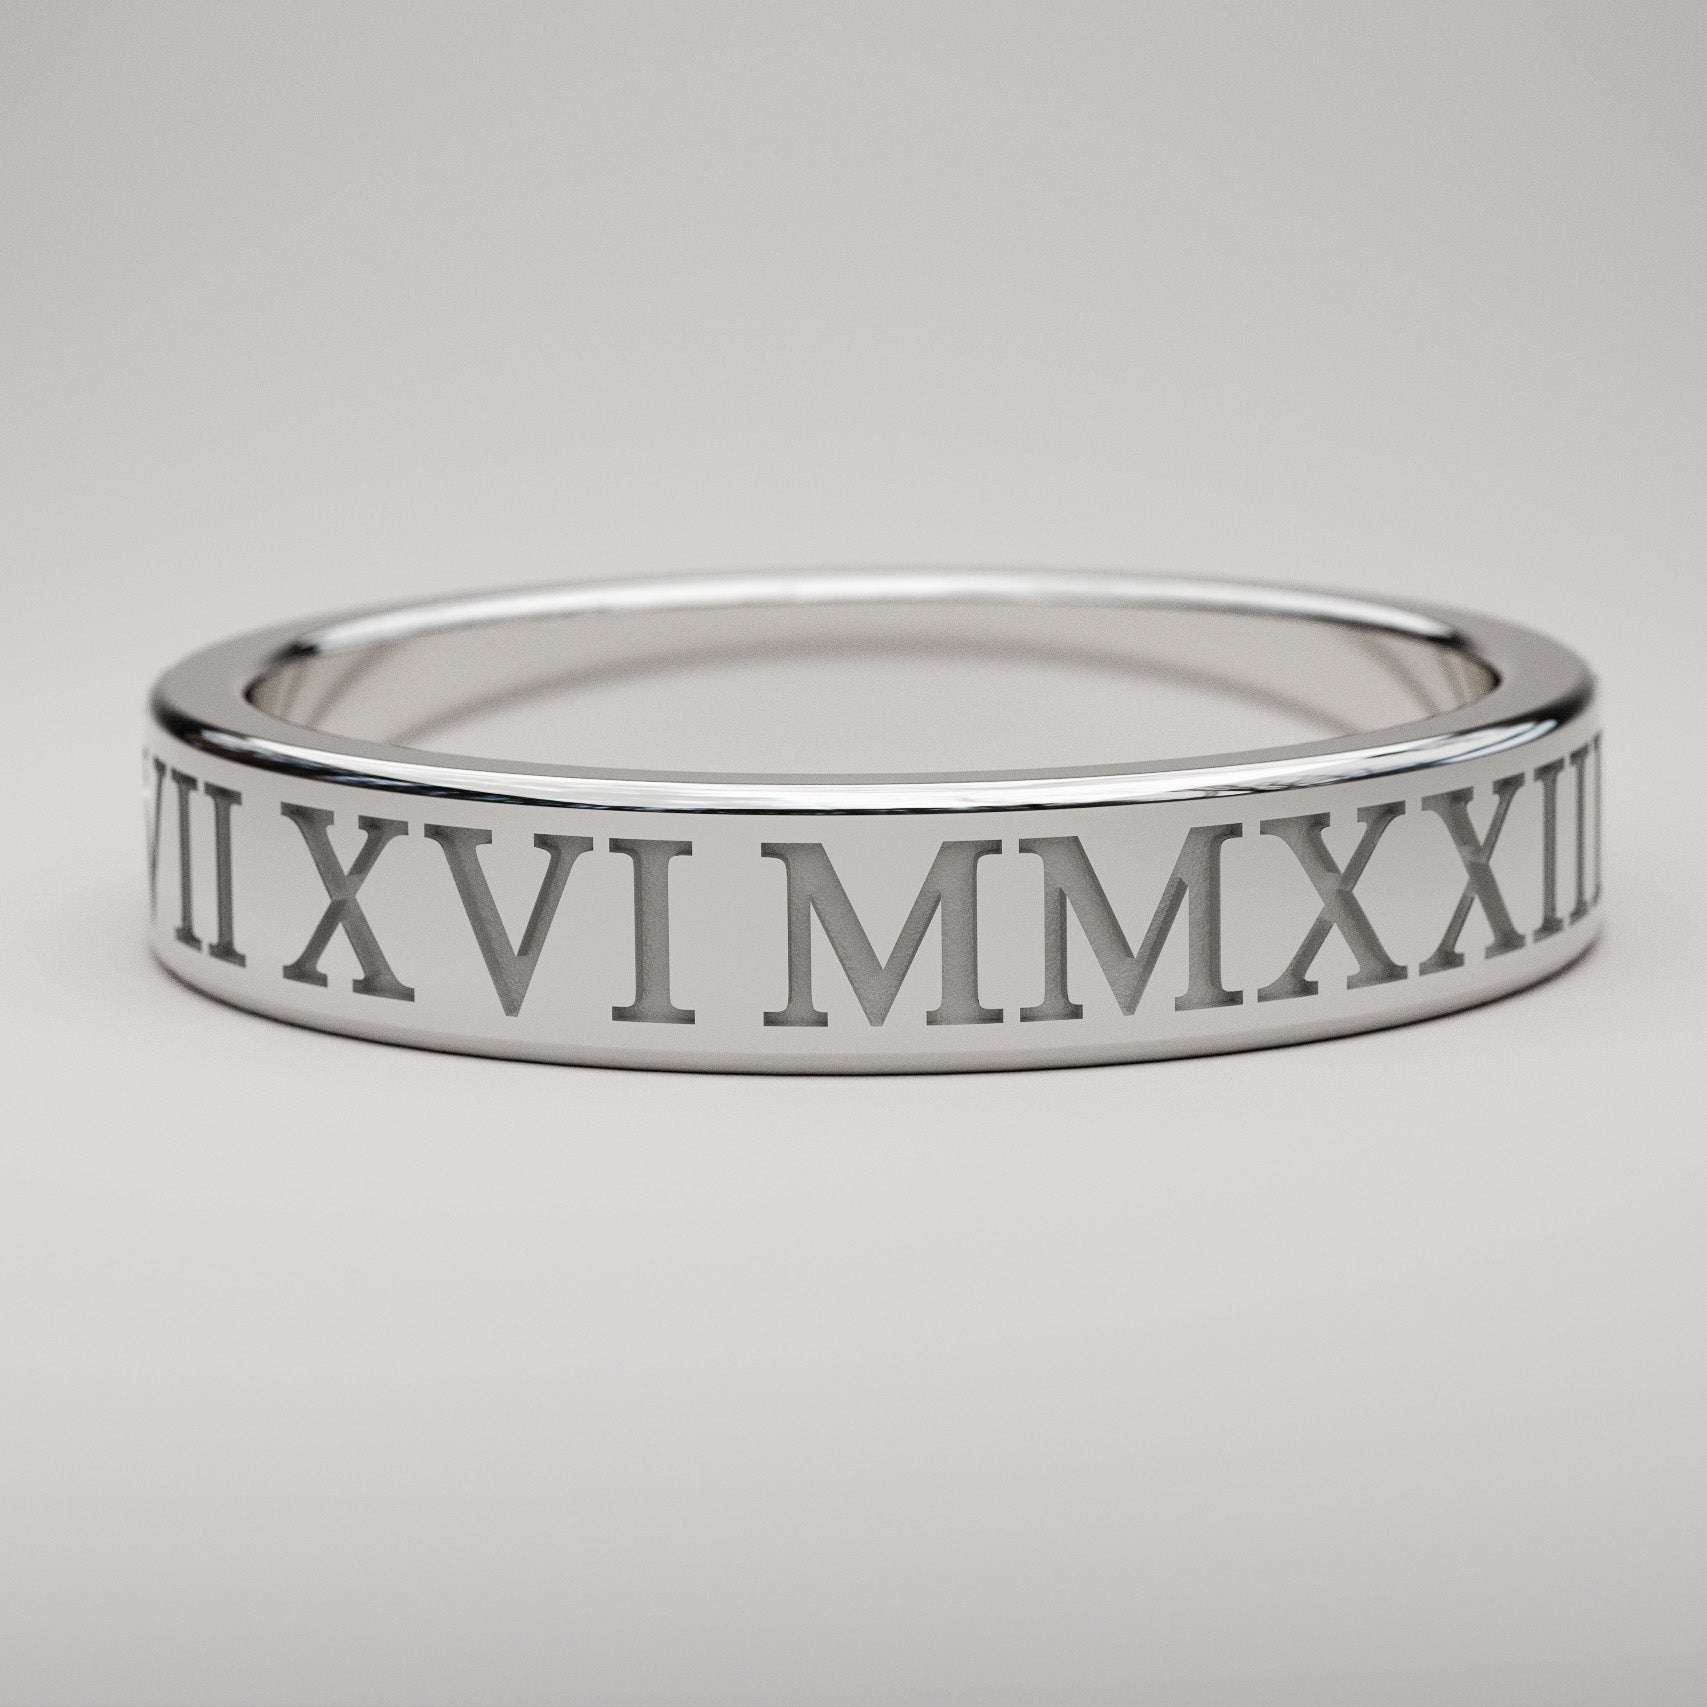 4mm engraved style custom Roman Numeral date ring in white gold